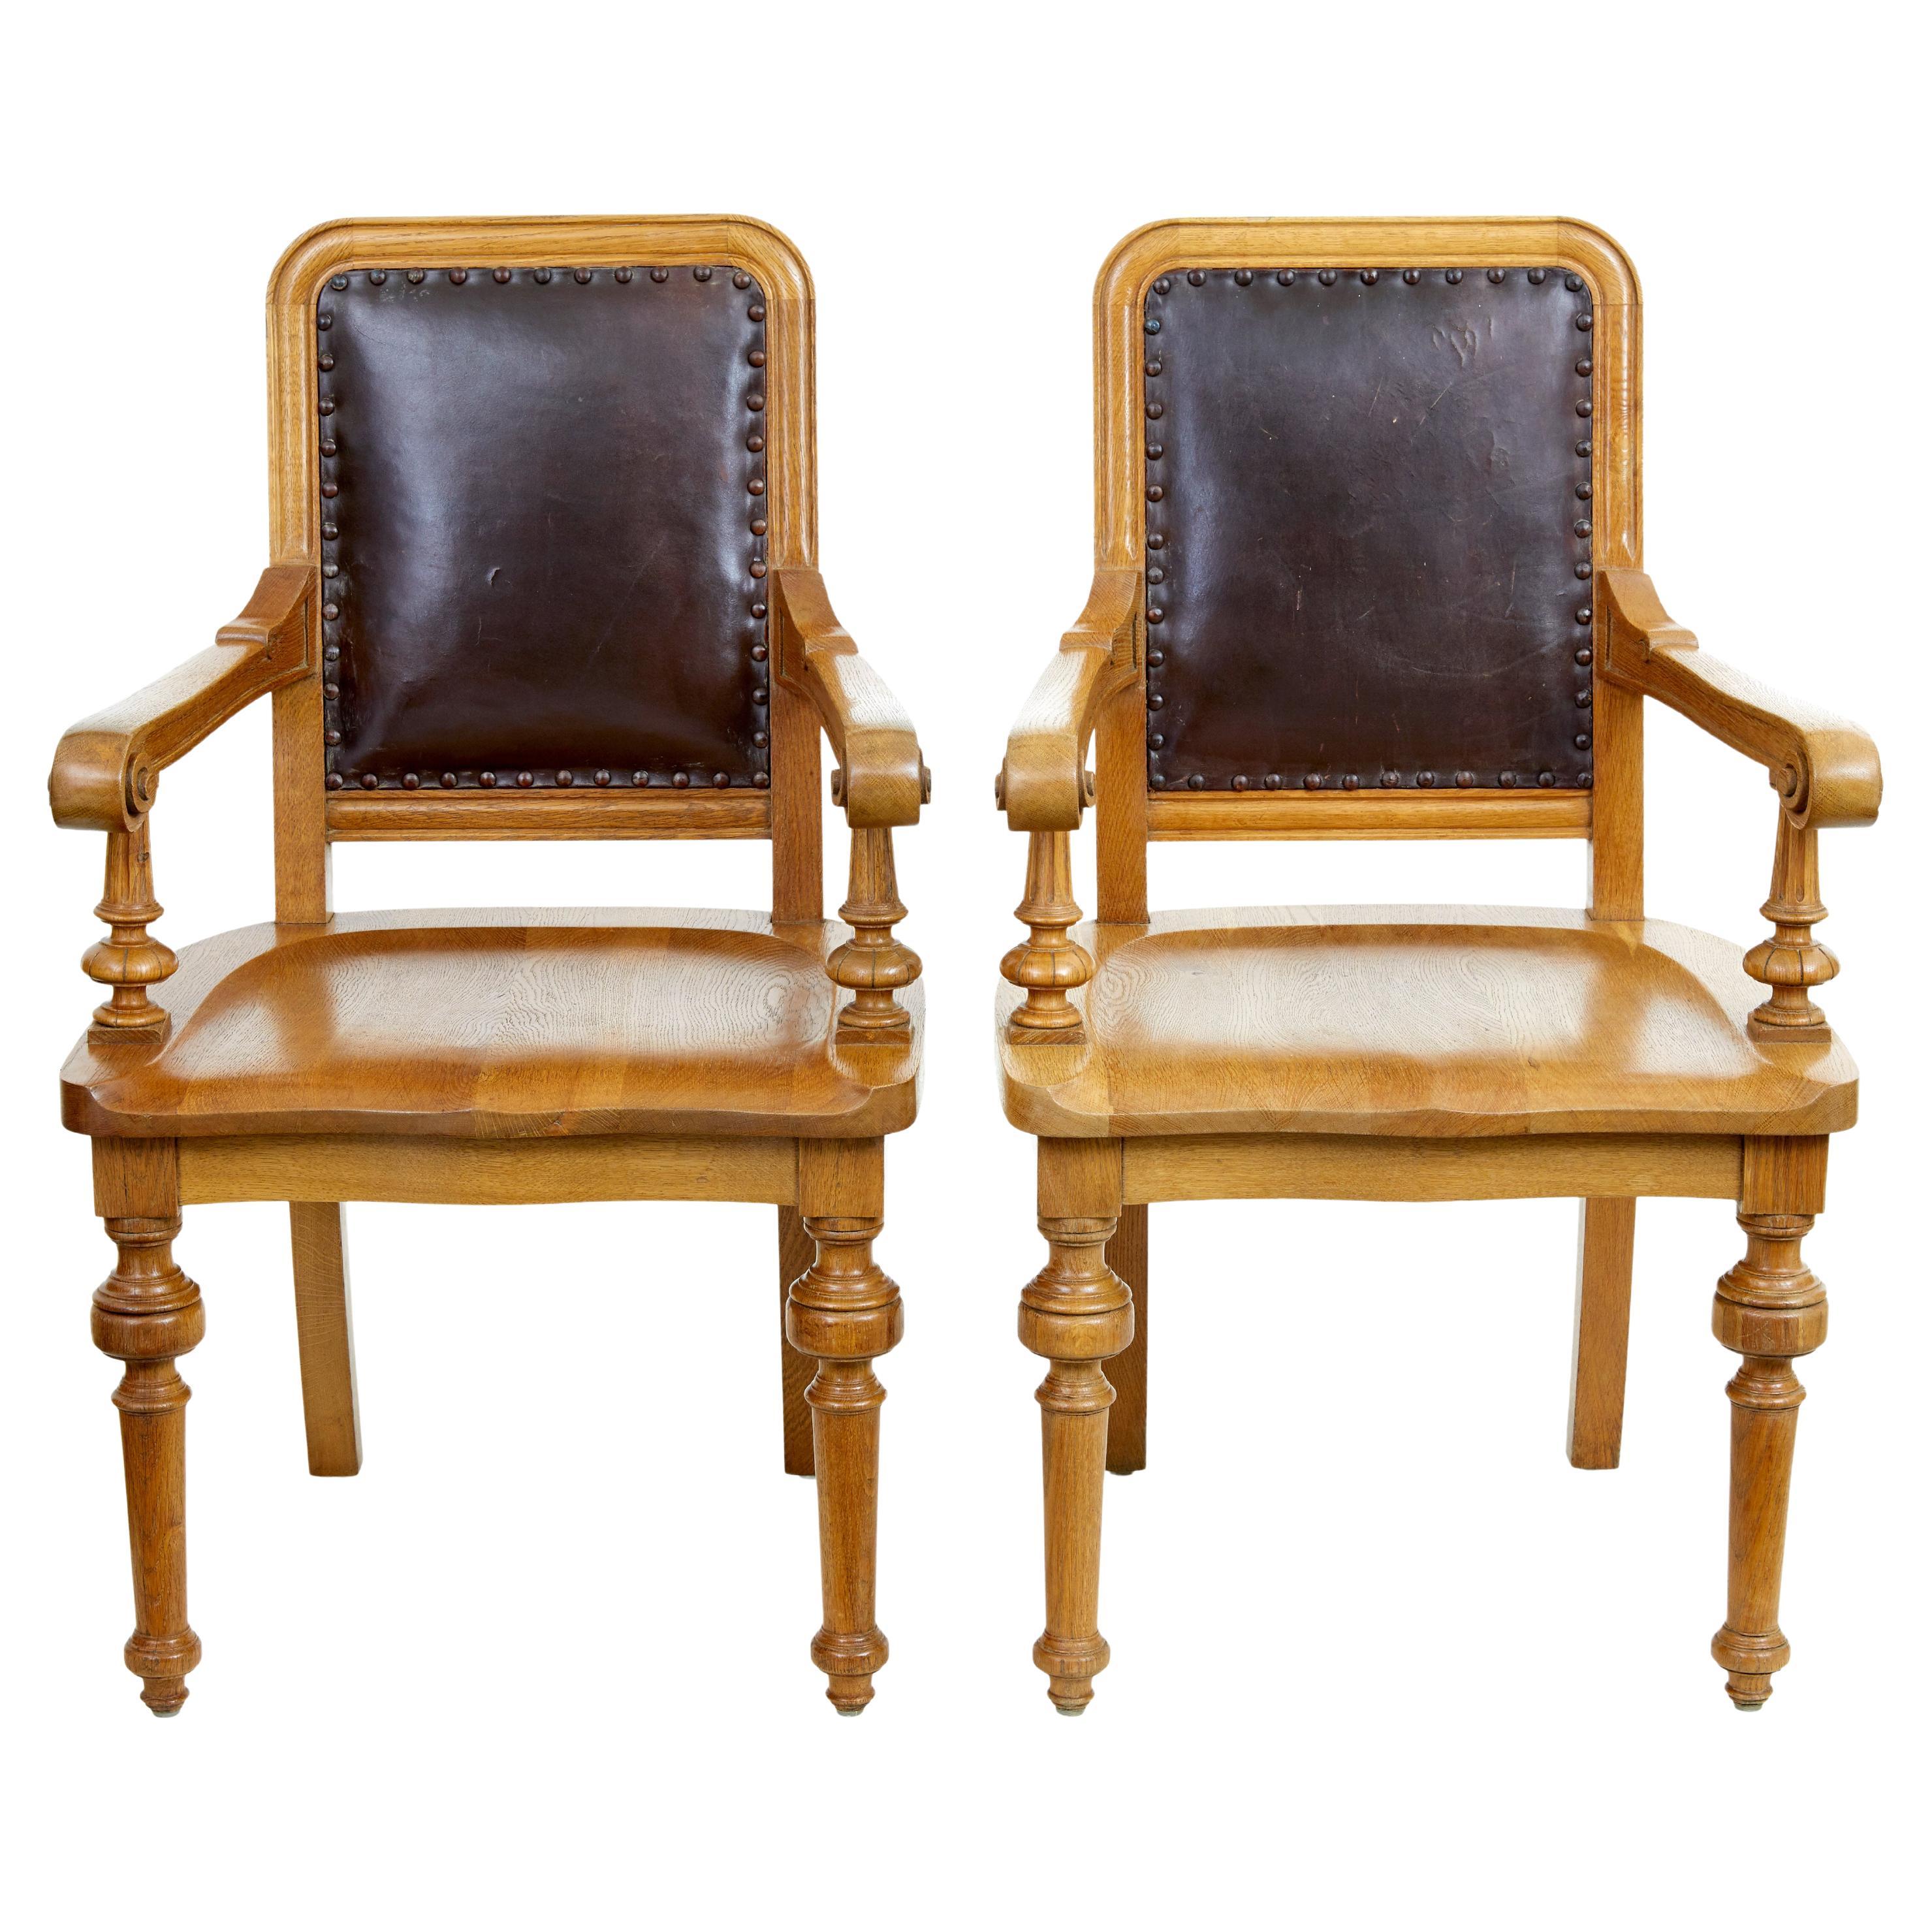 Pair of oak and leather arts and crafts library chairs